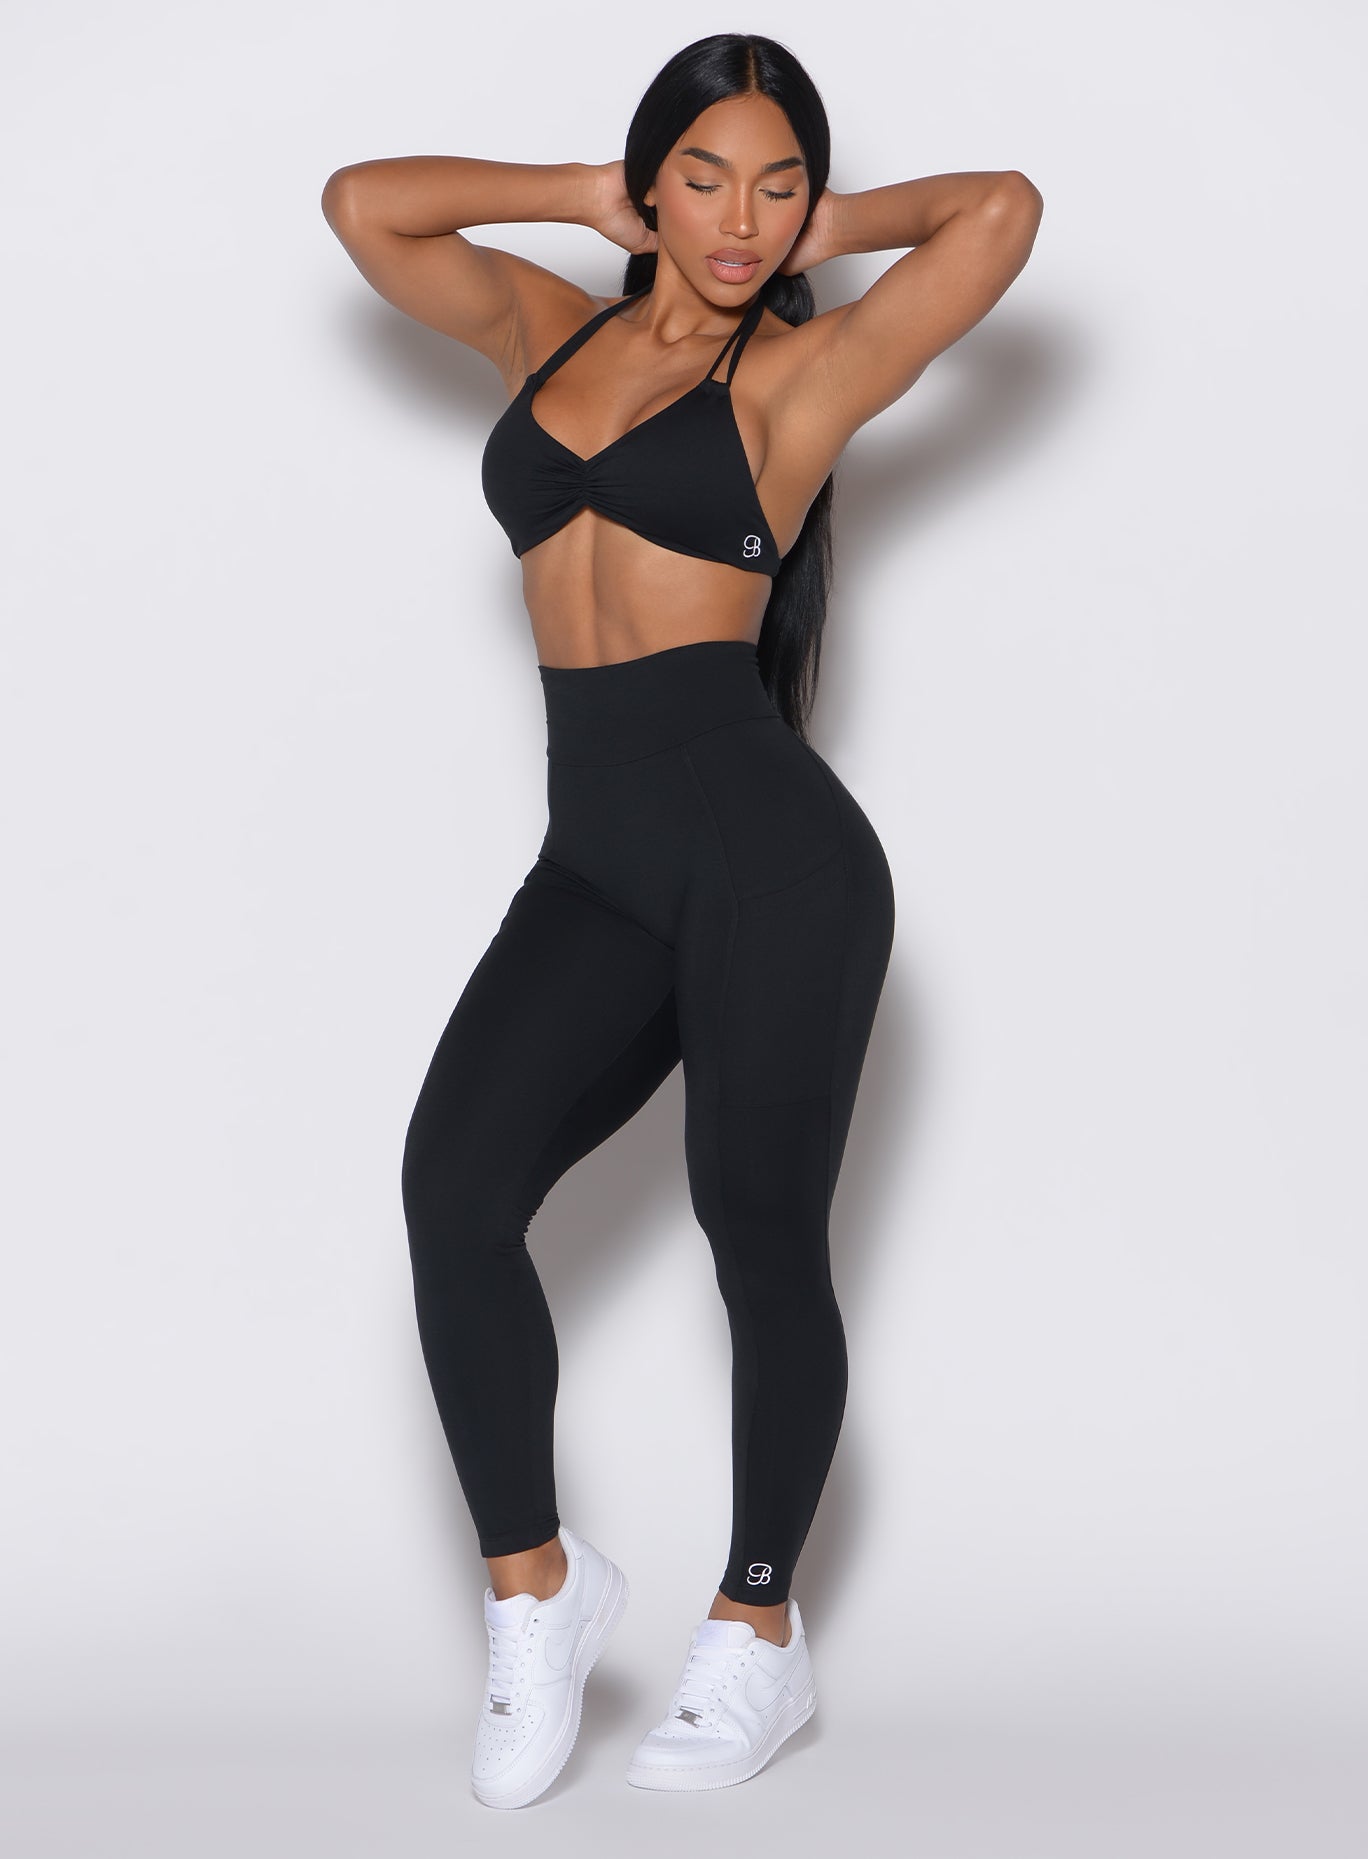 A front profile view captures a model elegantly posing with her hands behind her head, adorned in sleek black Curves leggings paired with a matching sports bra.